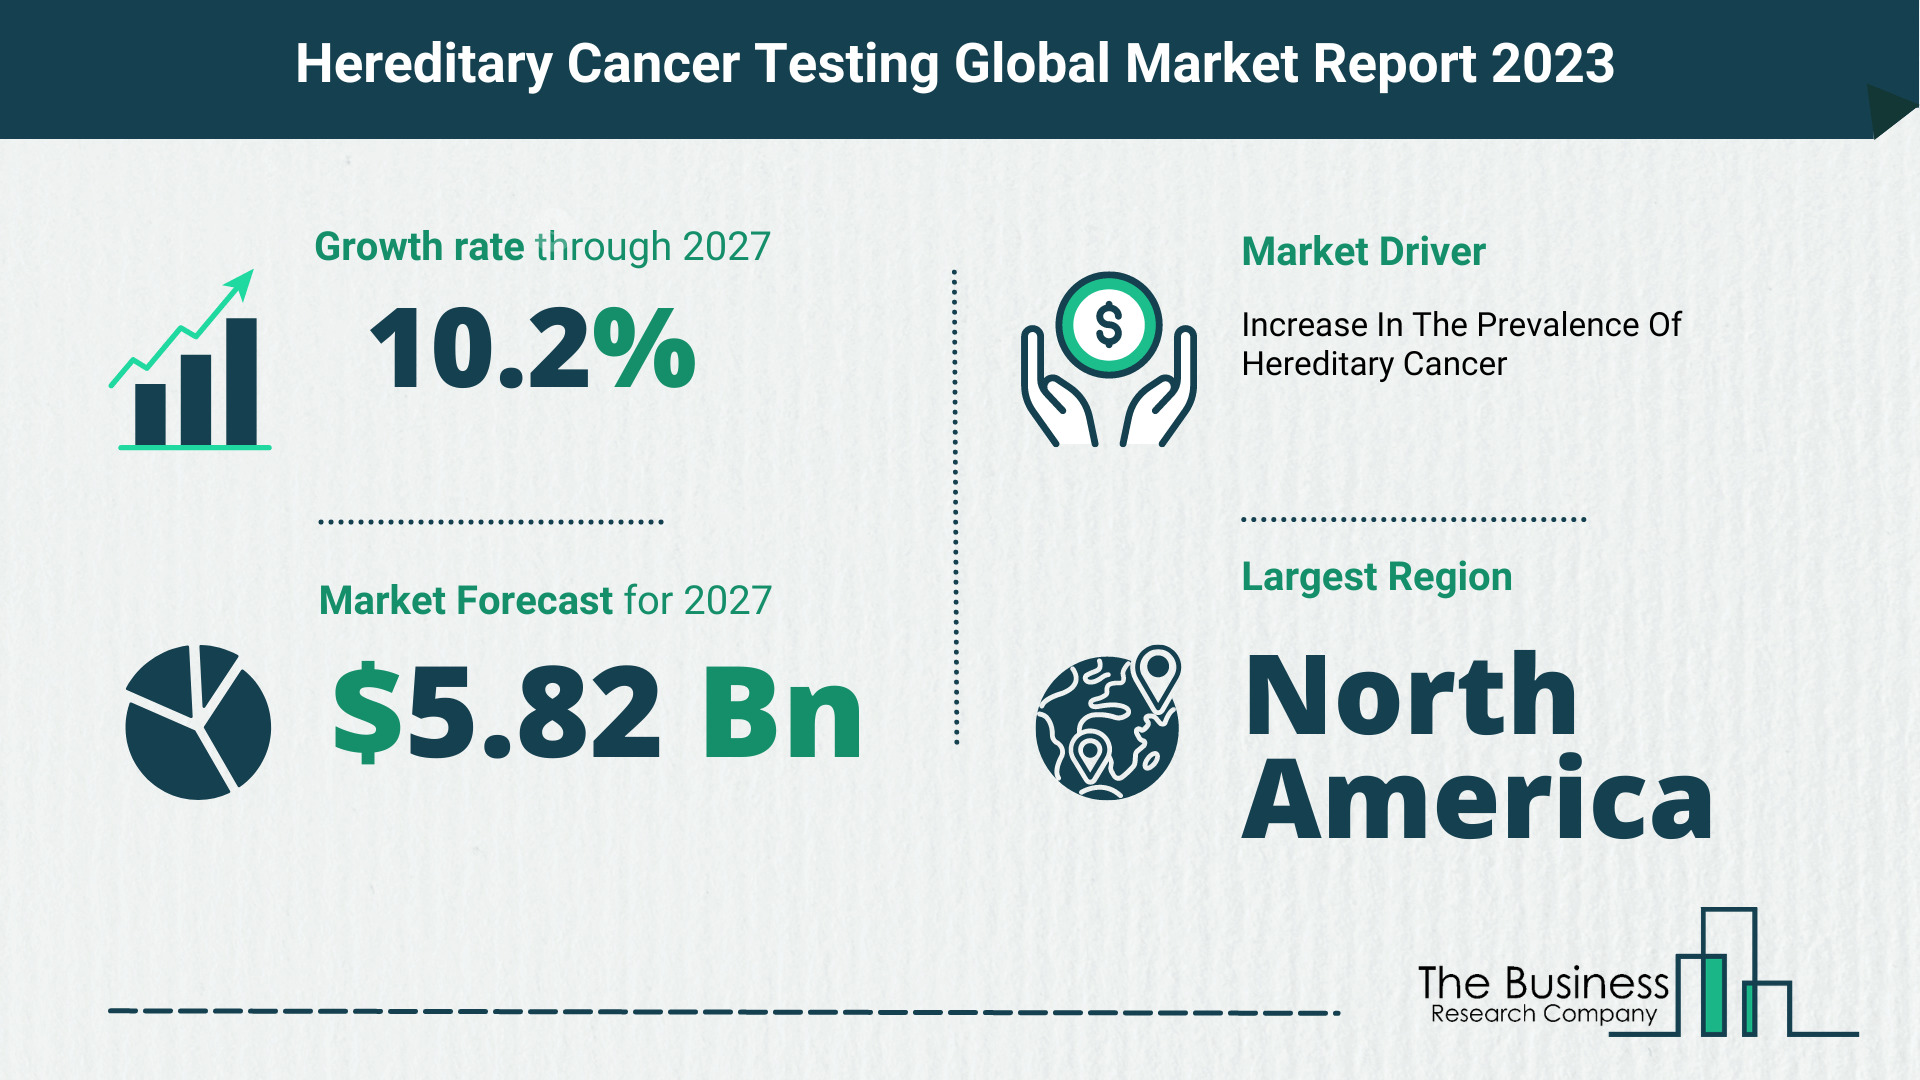 How Will The Hereditary Cancer Testing Market Globally Expand In 2023?